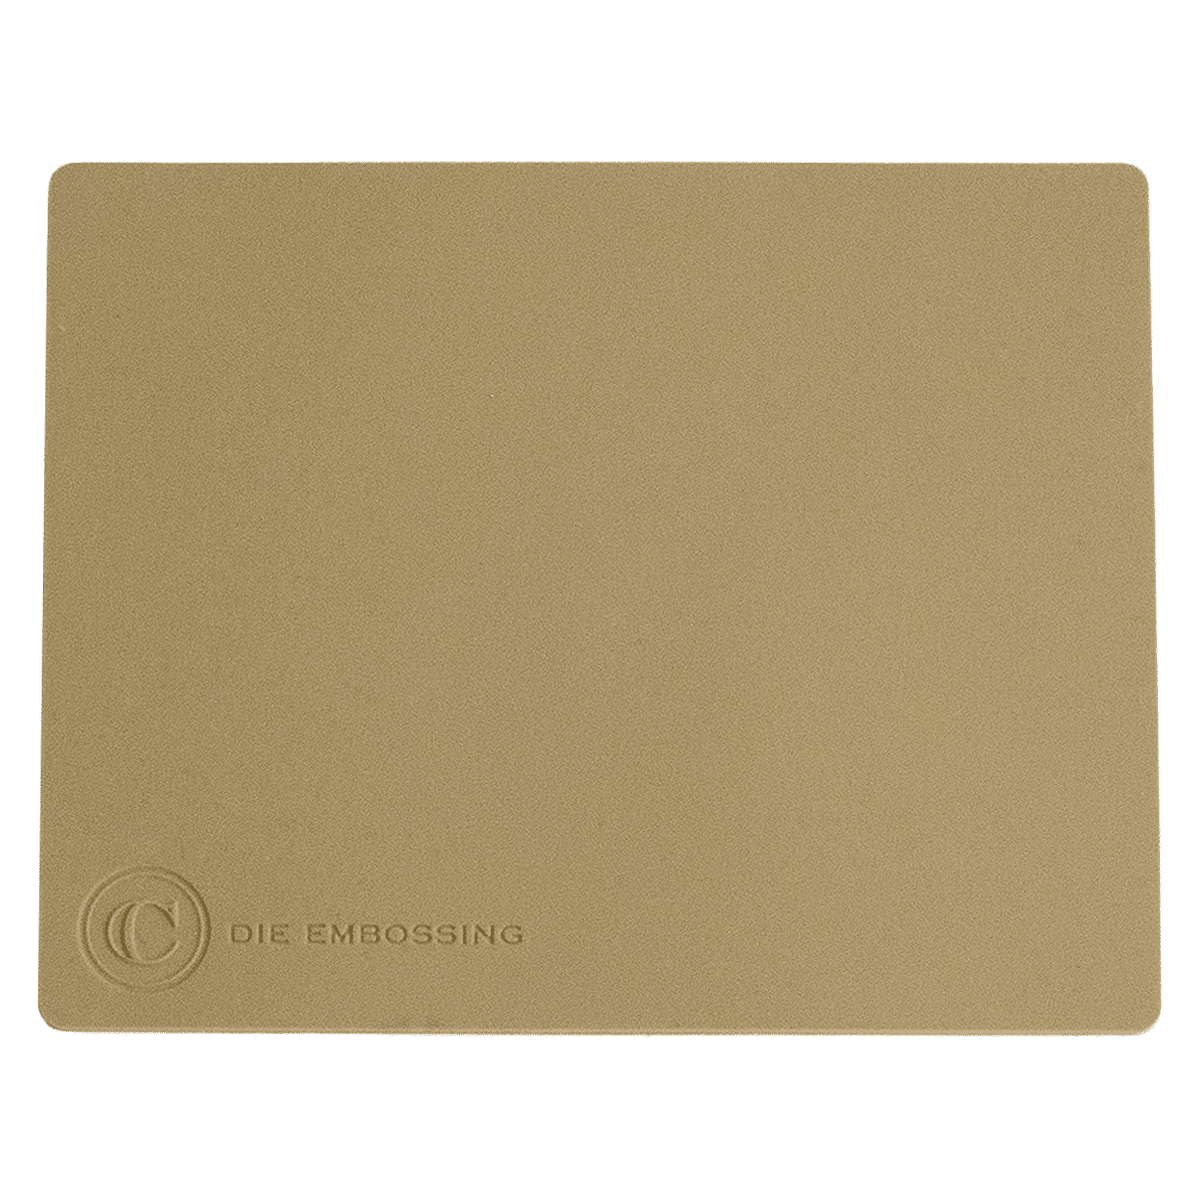 a beige mouse pad with a logo on it.